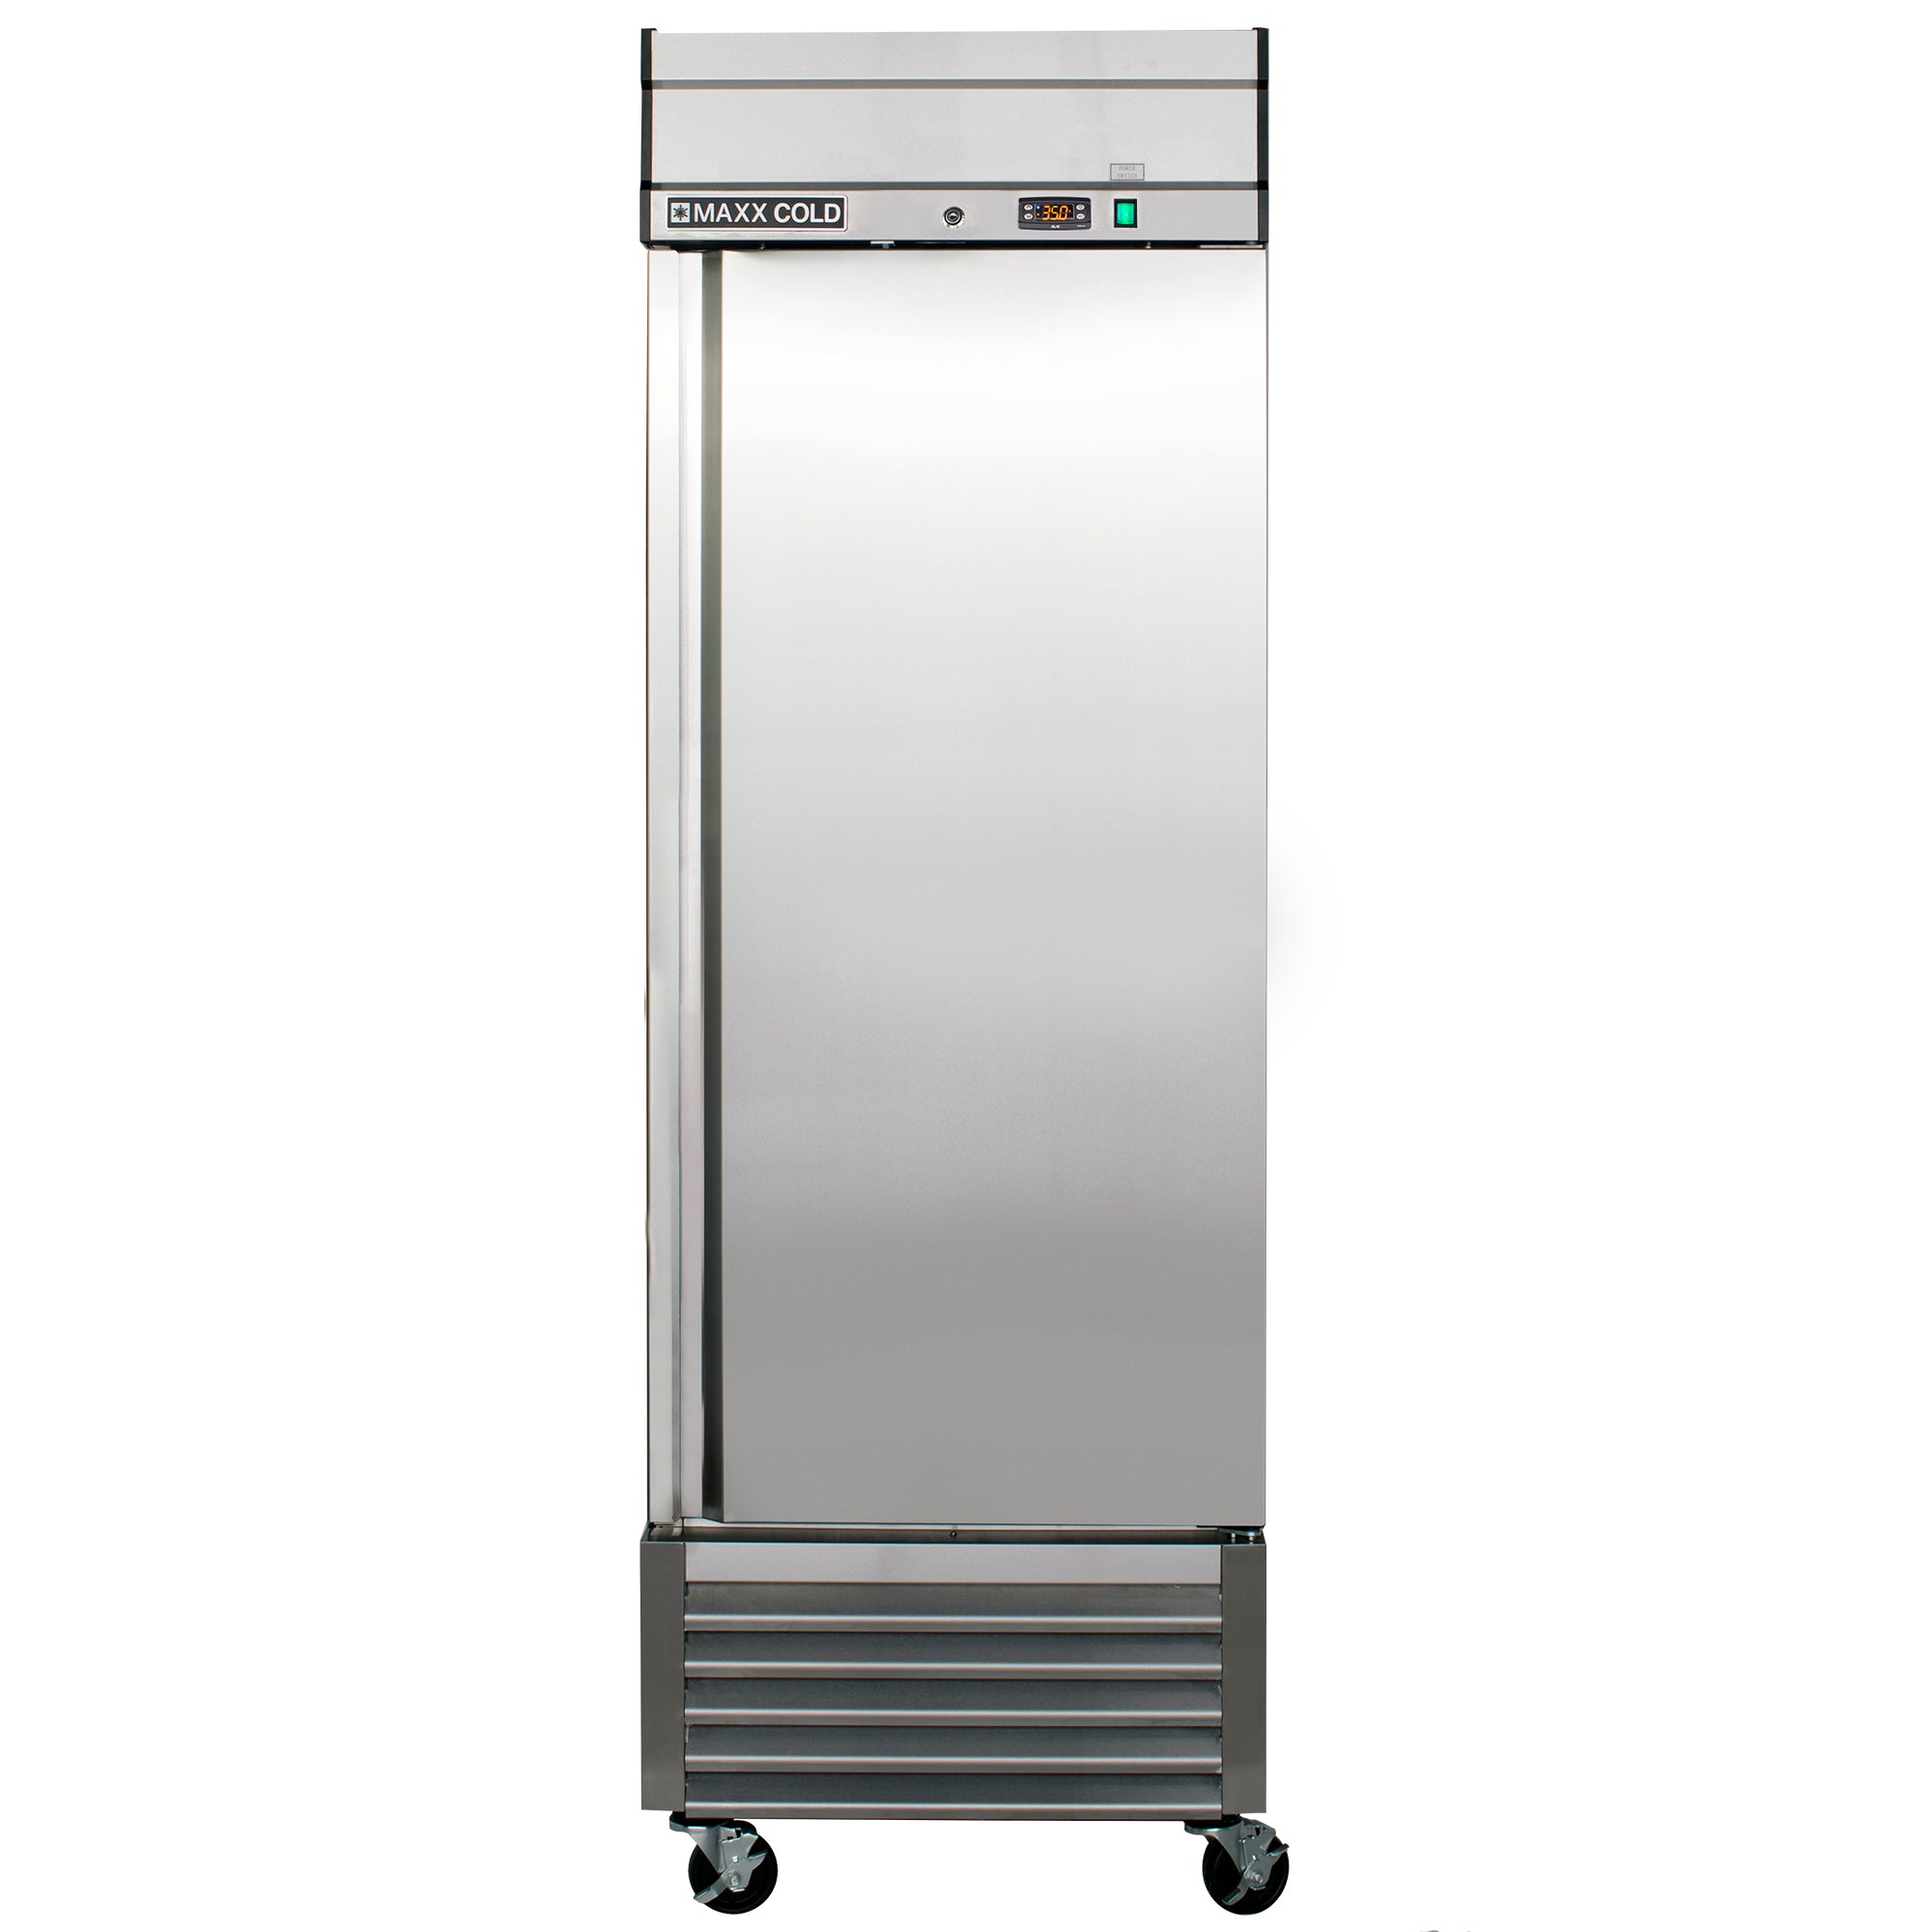 Maxx Cold - MXSR-23FDHC, Maxx Cold Single Door Reach-In Refrigerator, Bottom Mount, 27"W, 23 cu. ft. Storage Capacity, in Stainless Steel